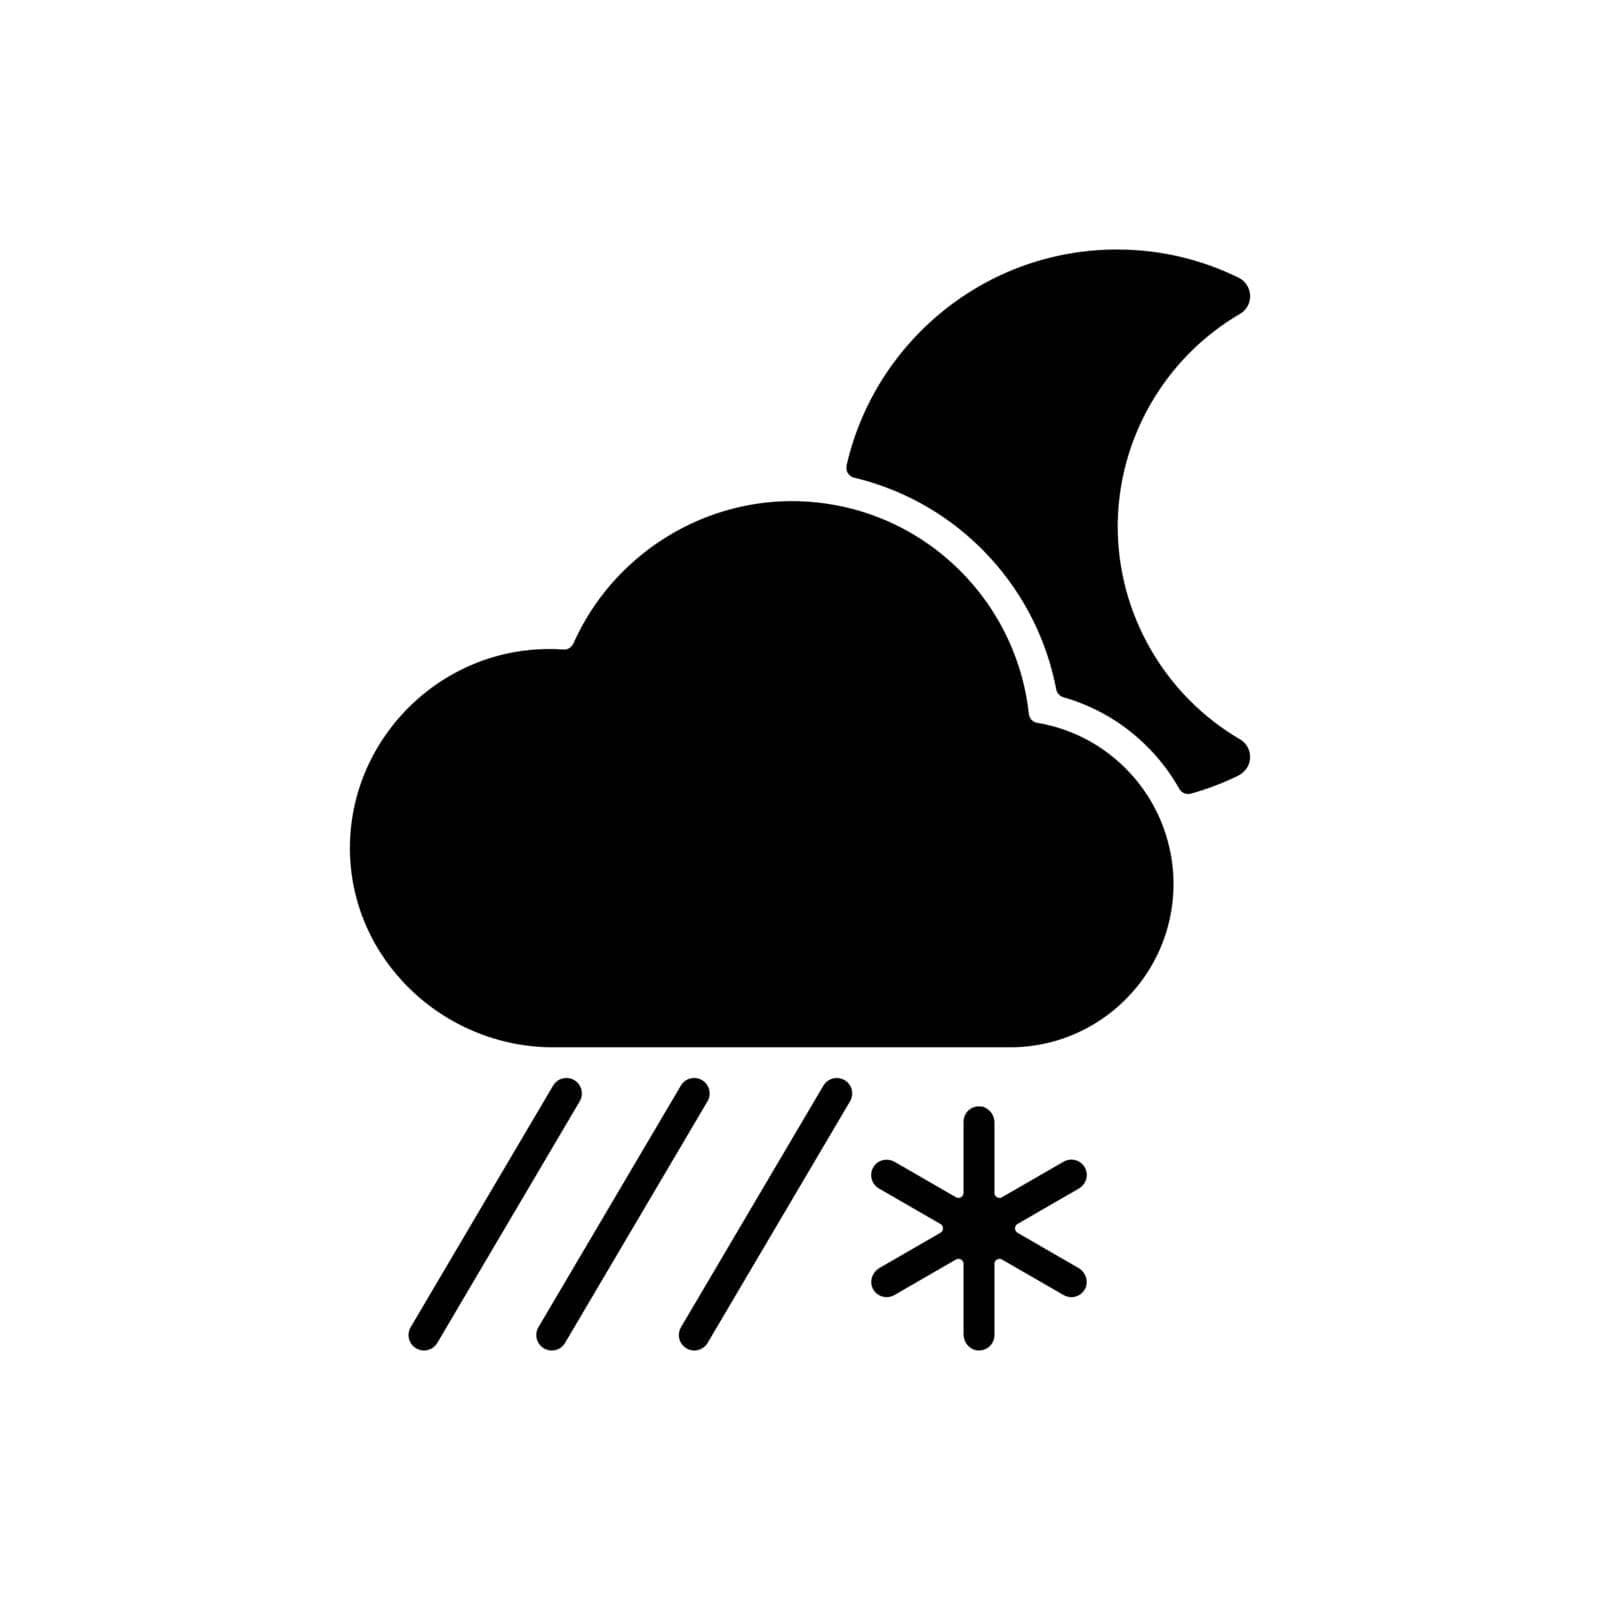 Rain cloud with snow moon glyph icon. Weather sign by nosik